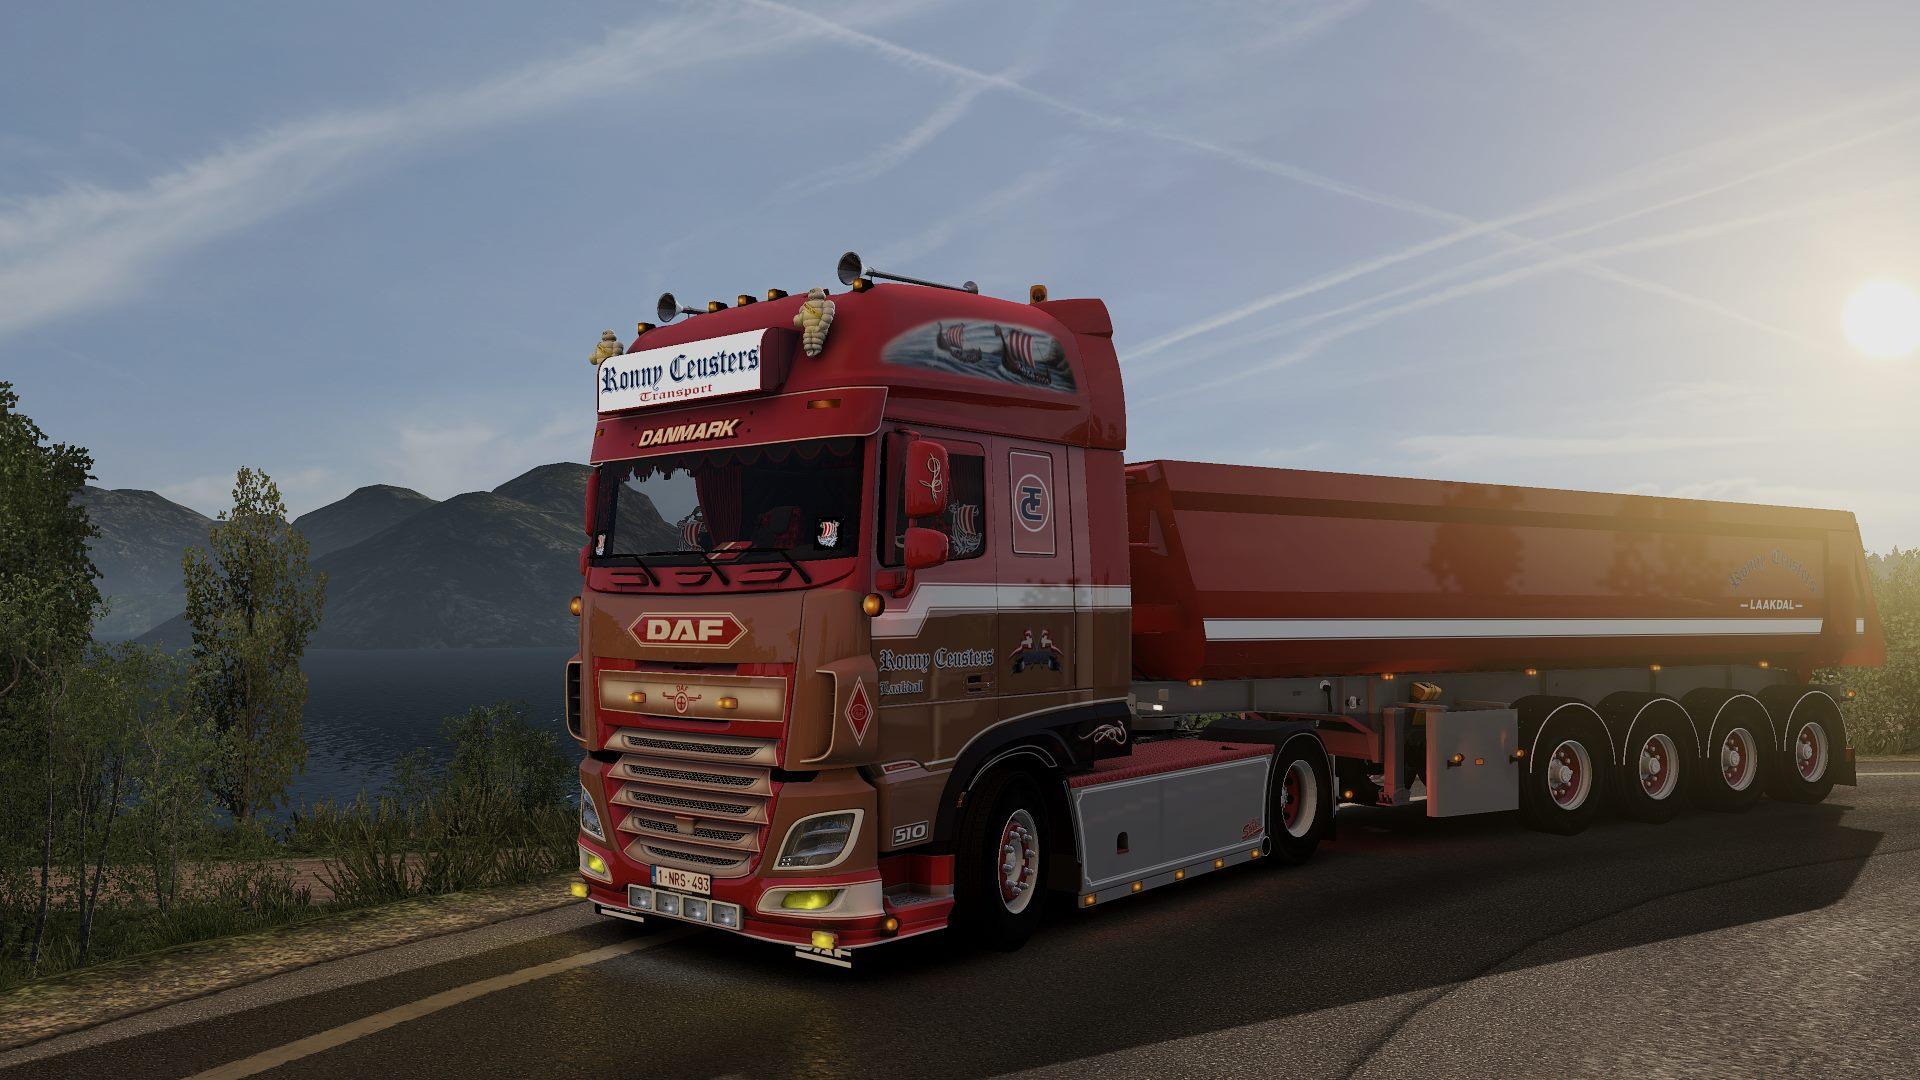 Daf And Trailer Ronny Ceusters Ets2 Mods Euro Truck Simulator 2 Mods